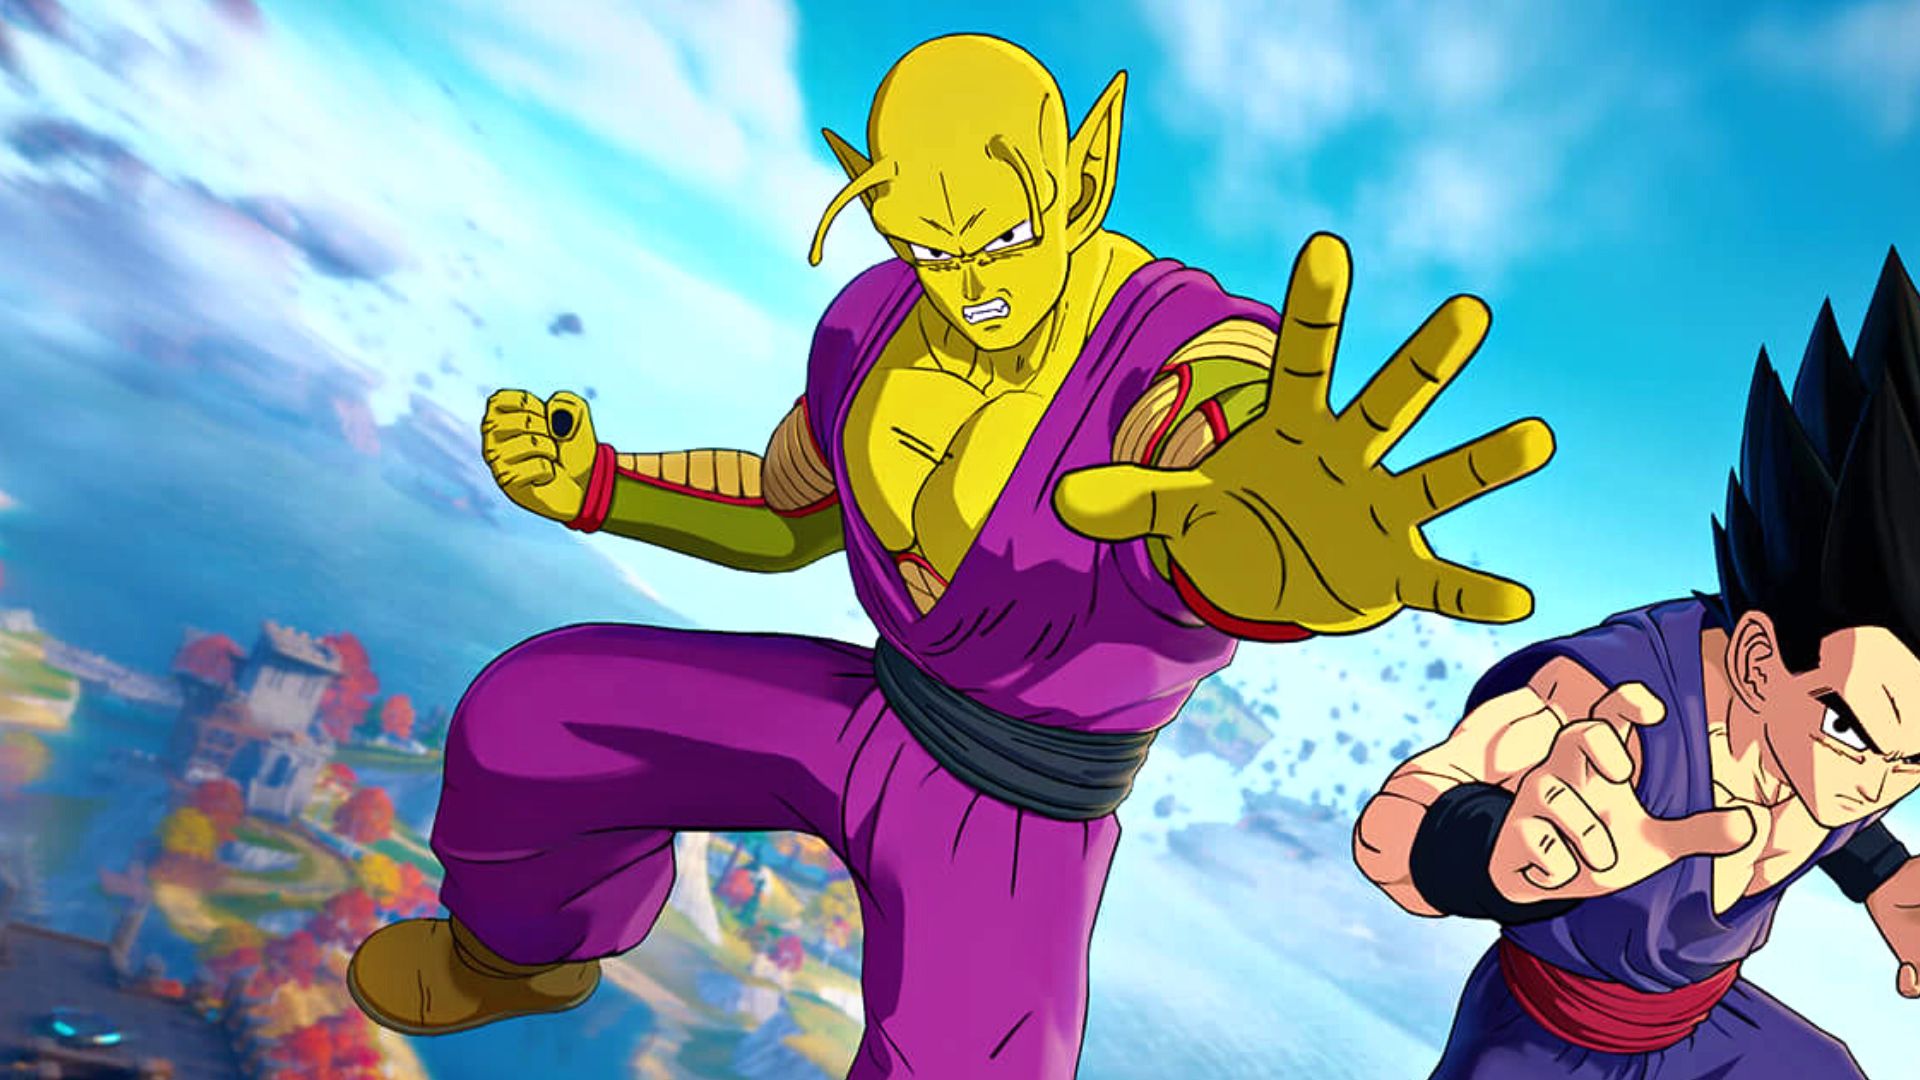 Piccolo and Gohan get new forms in Dragon Ball Xenoverse 2